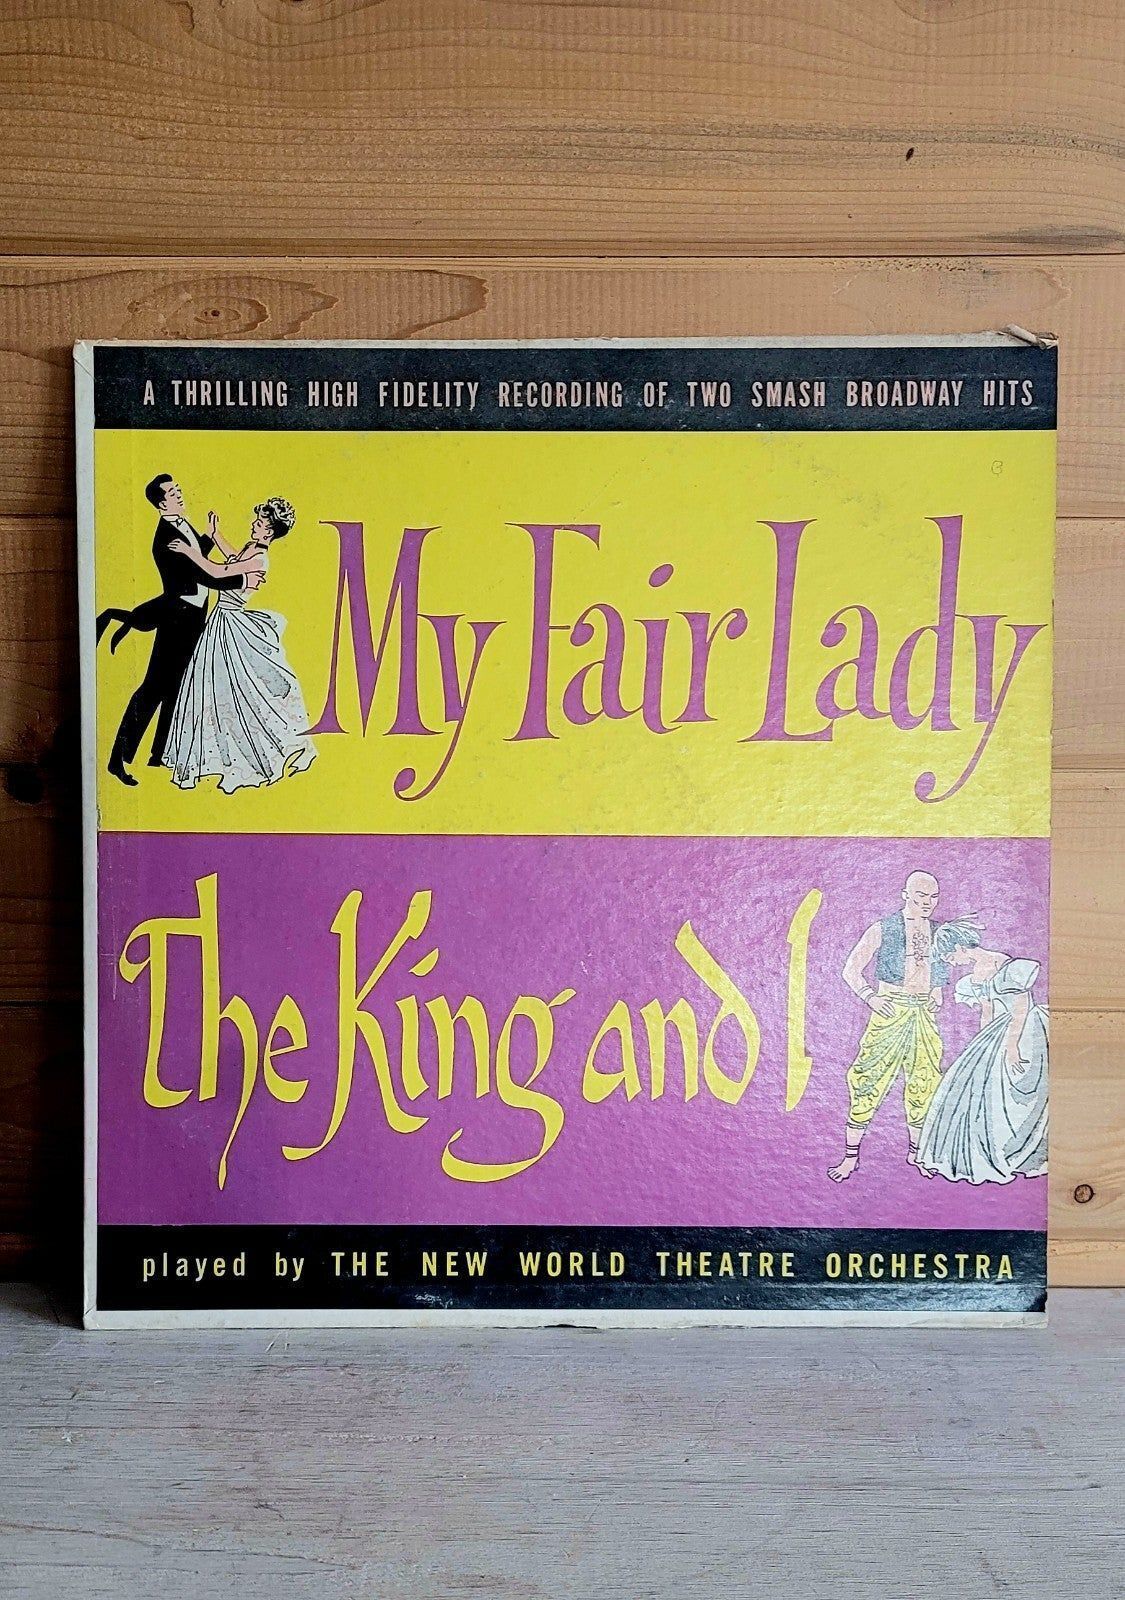 Primary image for My Fair Lady The King and I Broadway Soundtrack Vinyl Record LP 33 RPM 12"